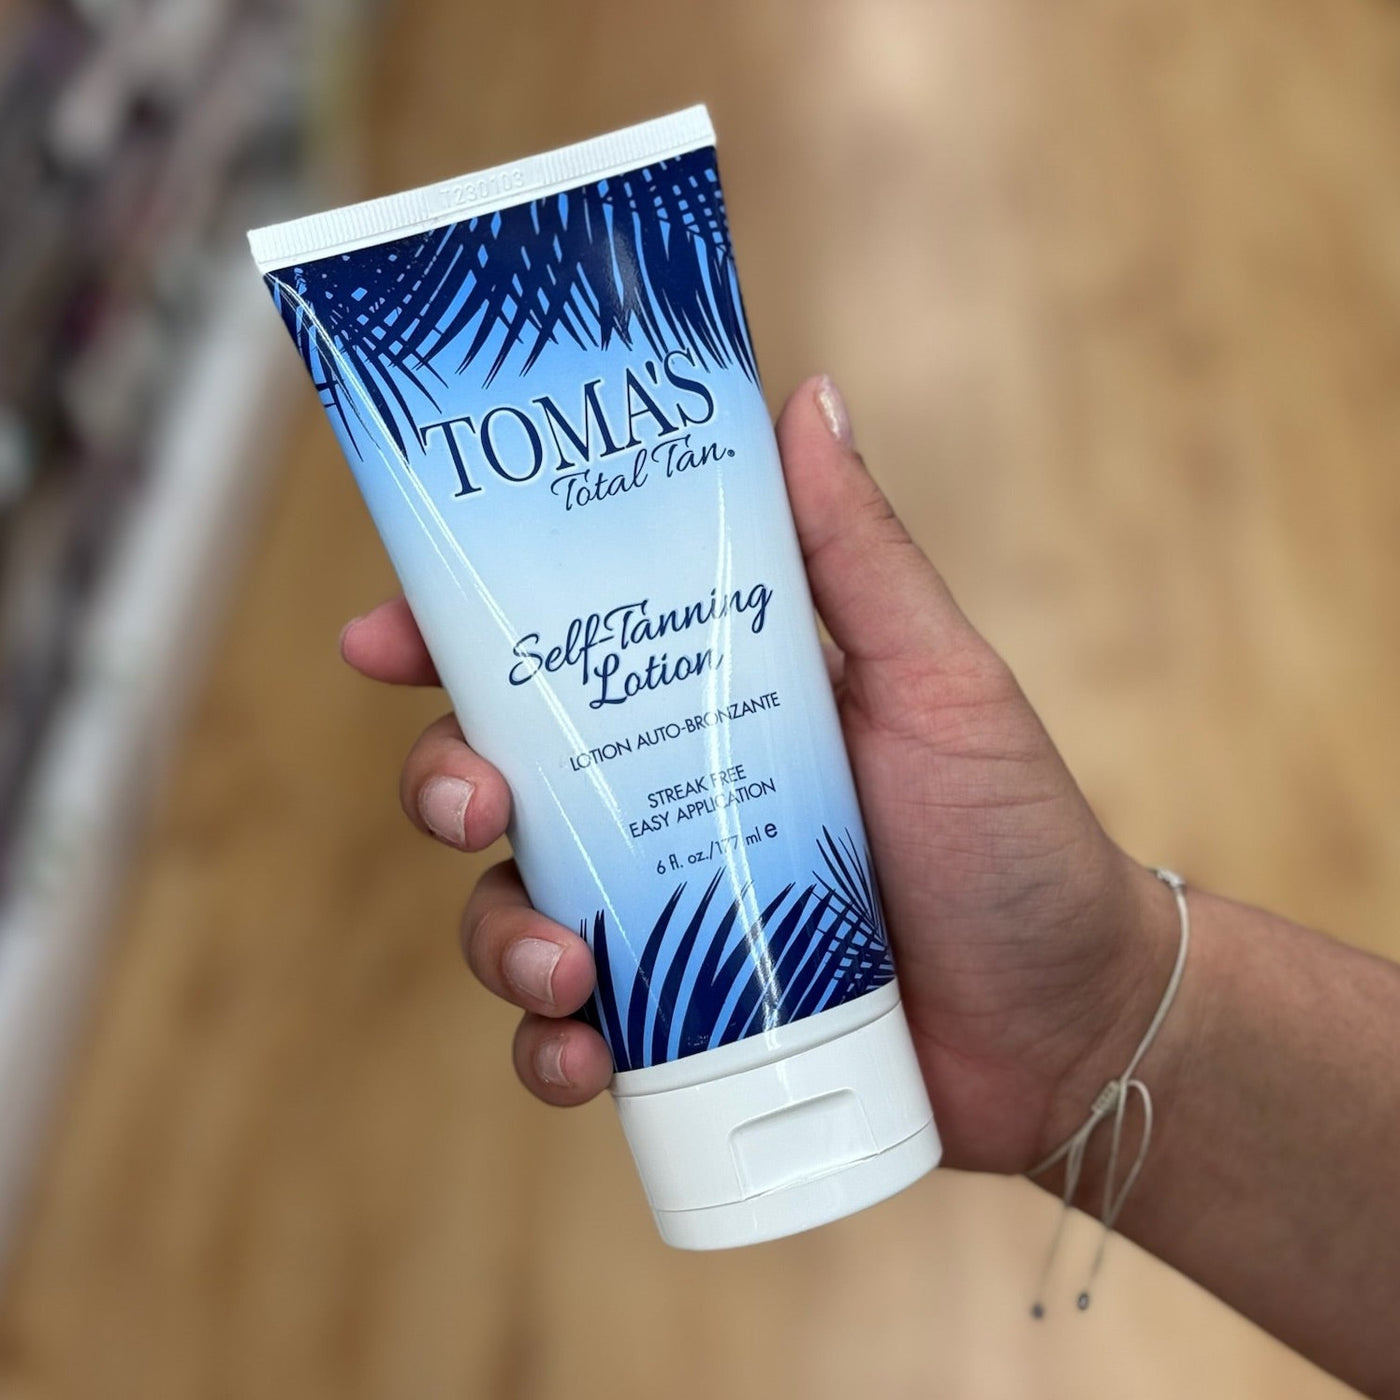 Toma's Total Tan Self-Tanning Lotion